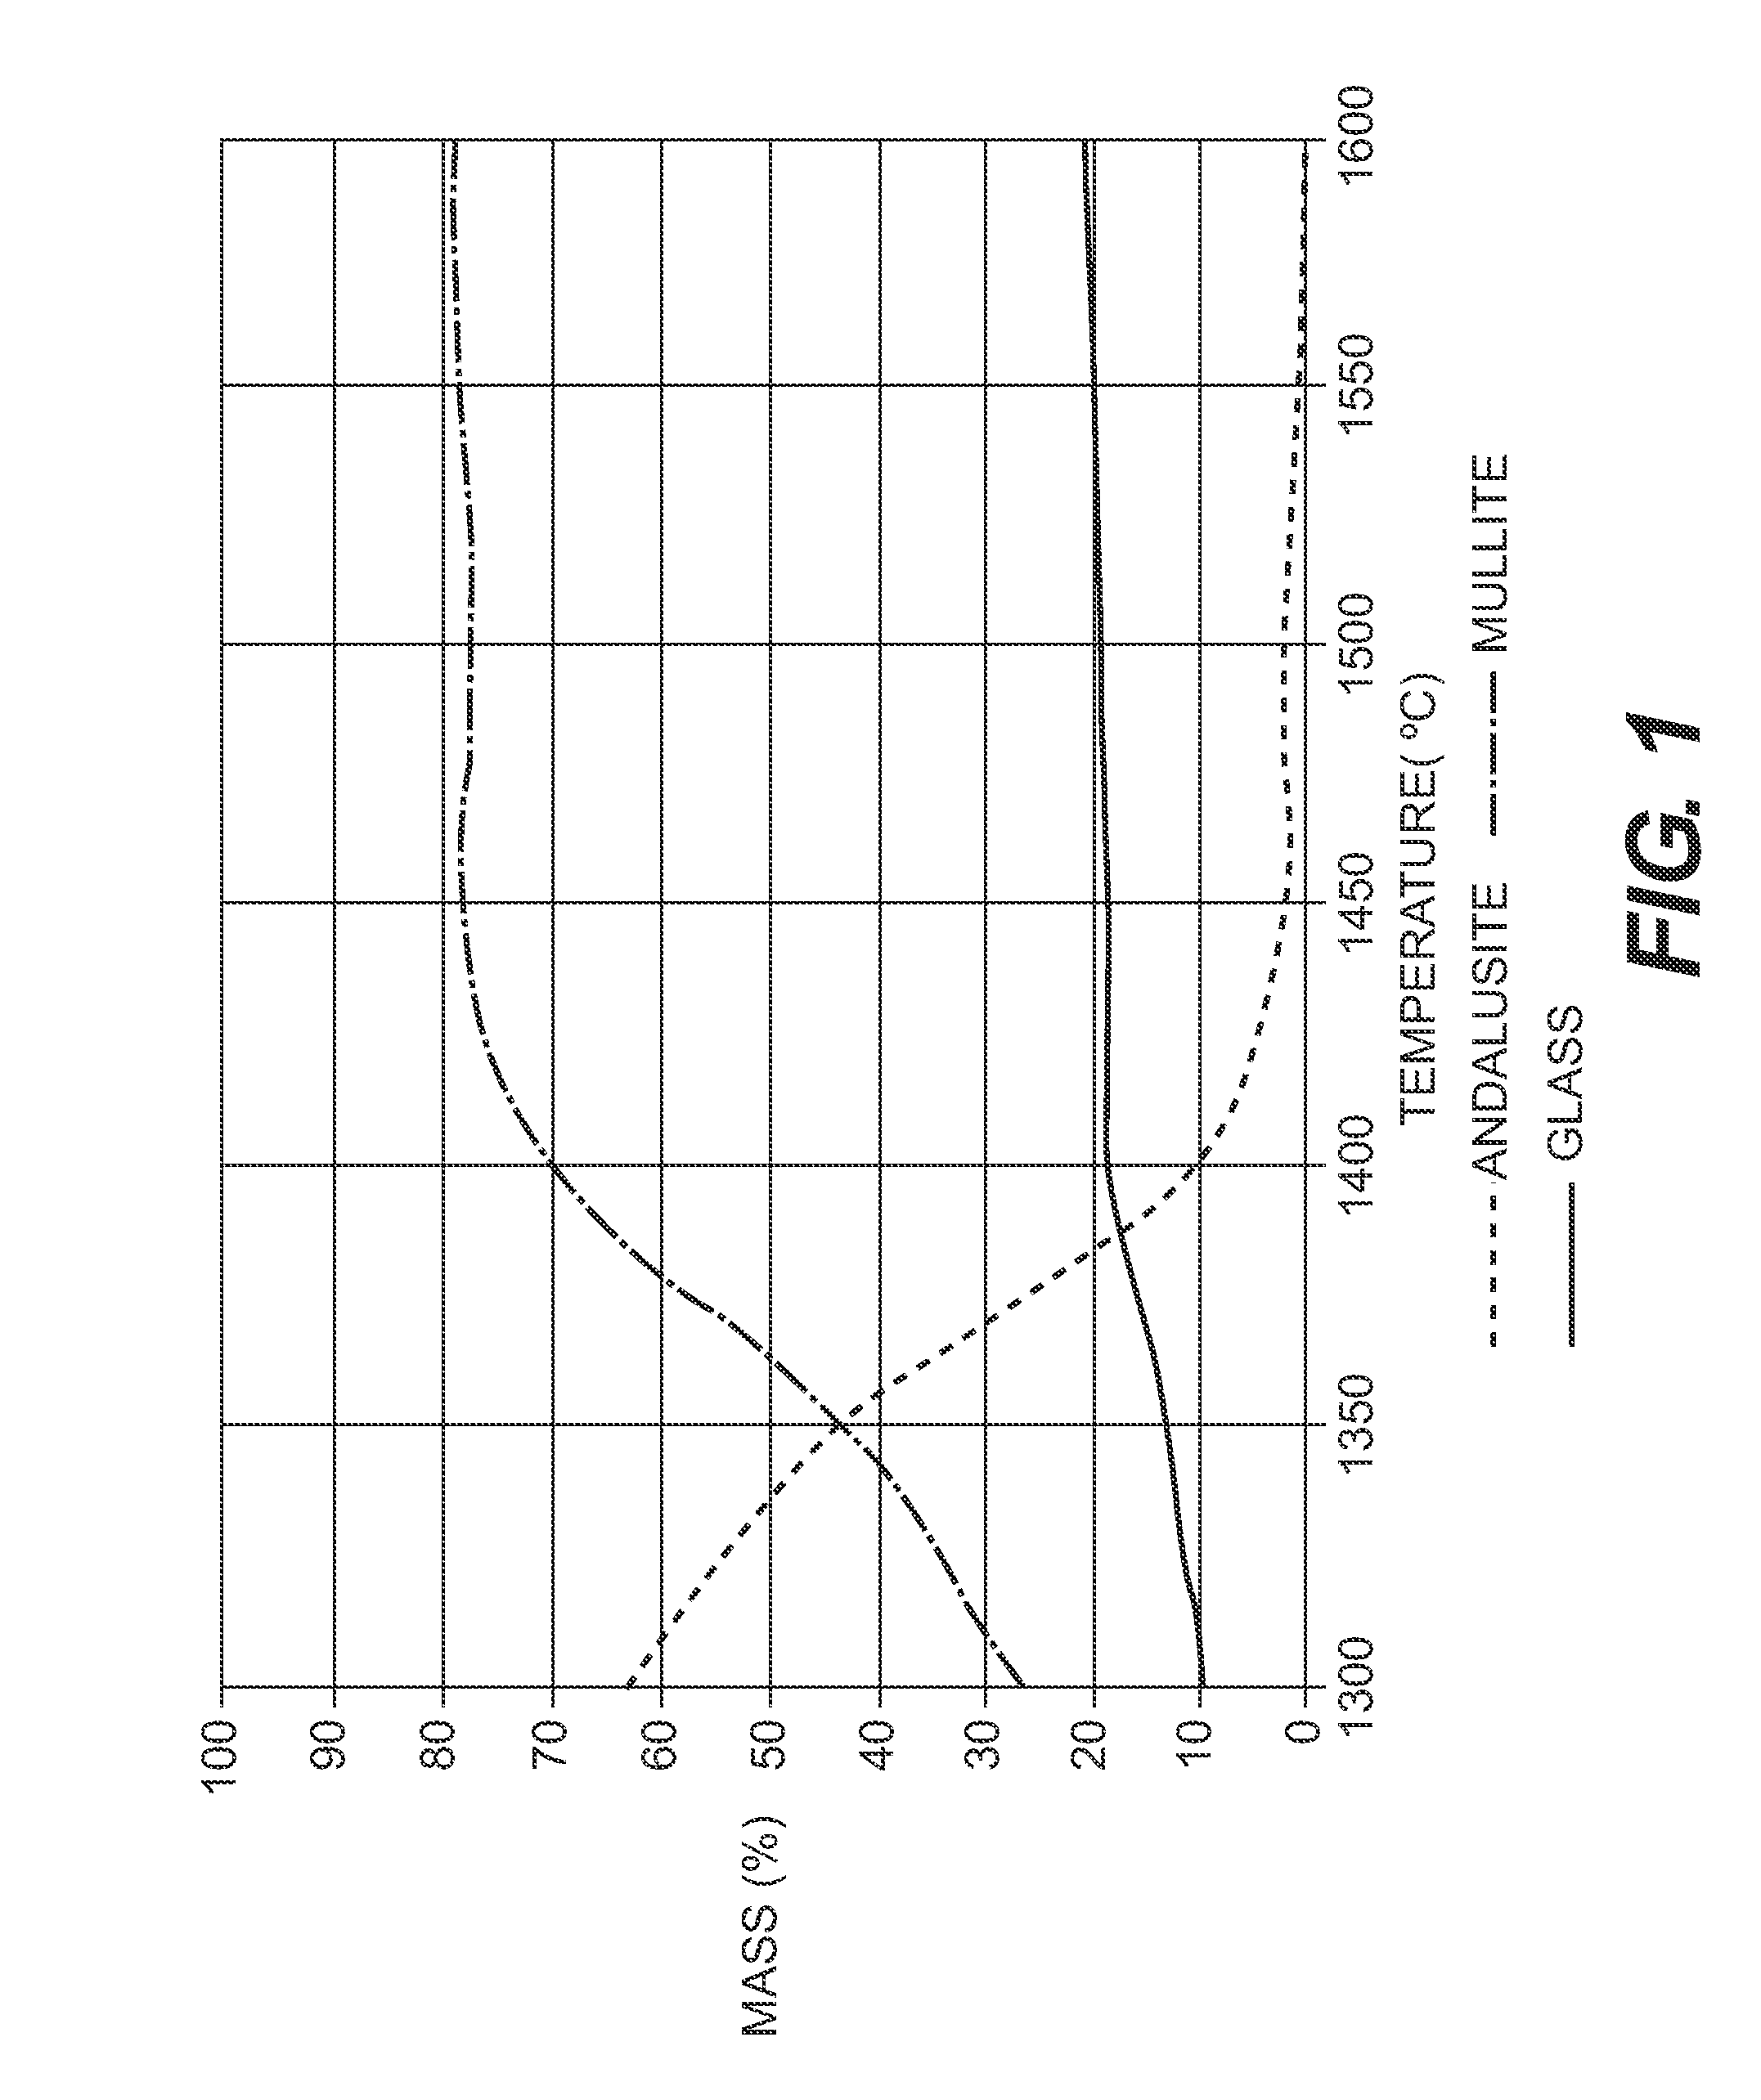 Proppants and Anti-flowback additives made from sillimanite minerals, methods of manufacture, and methods of use